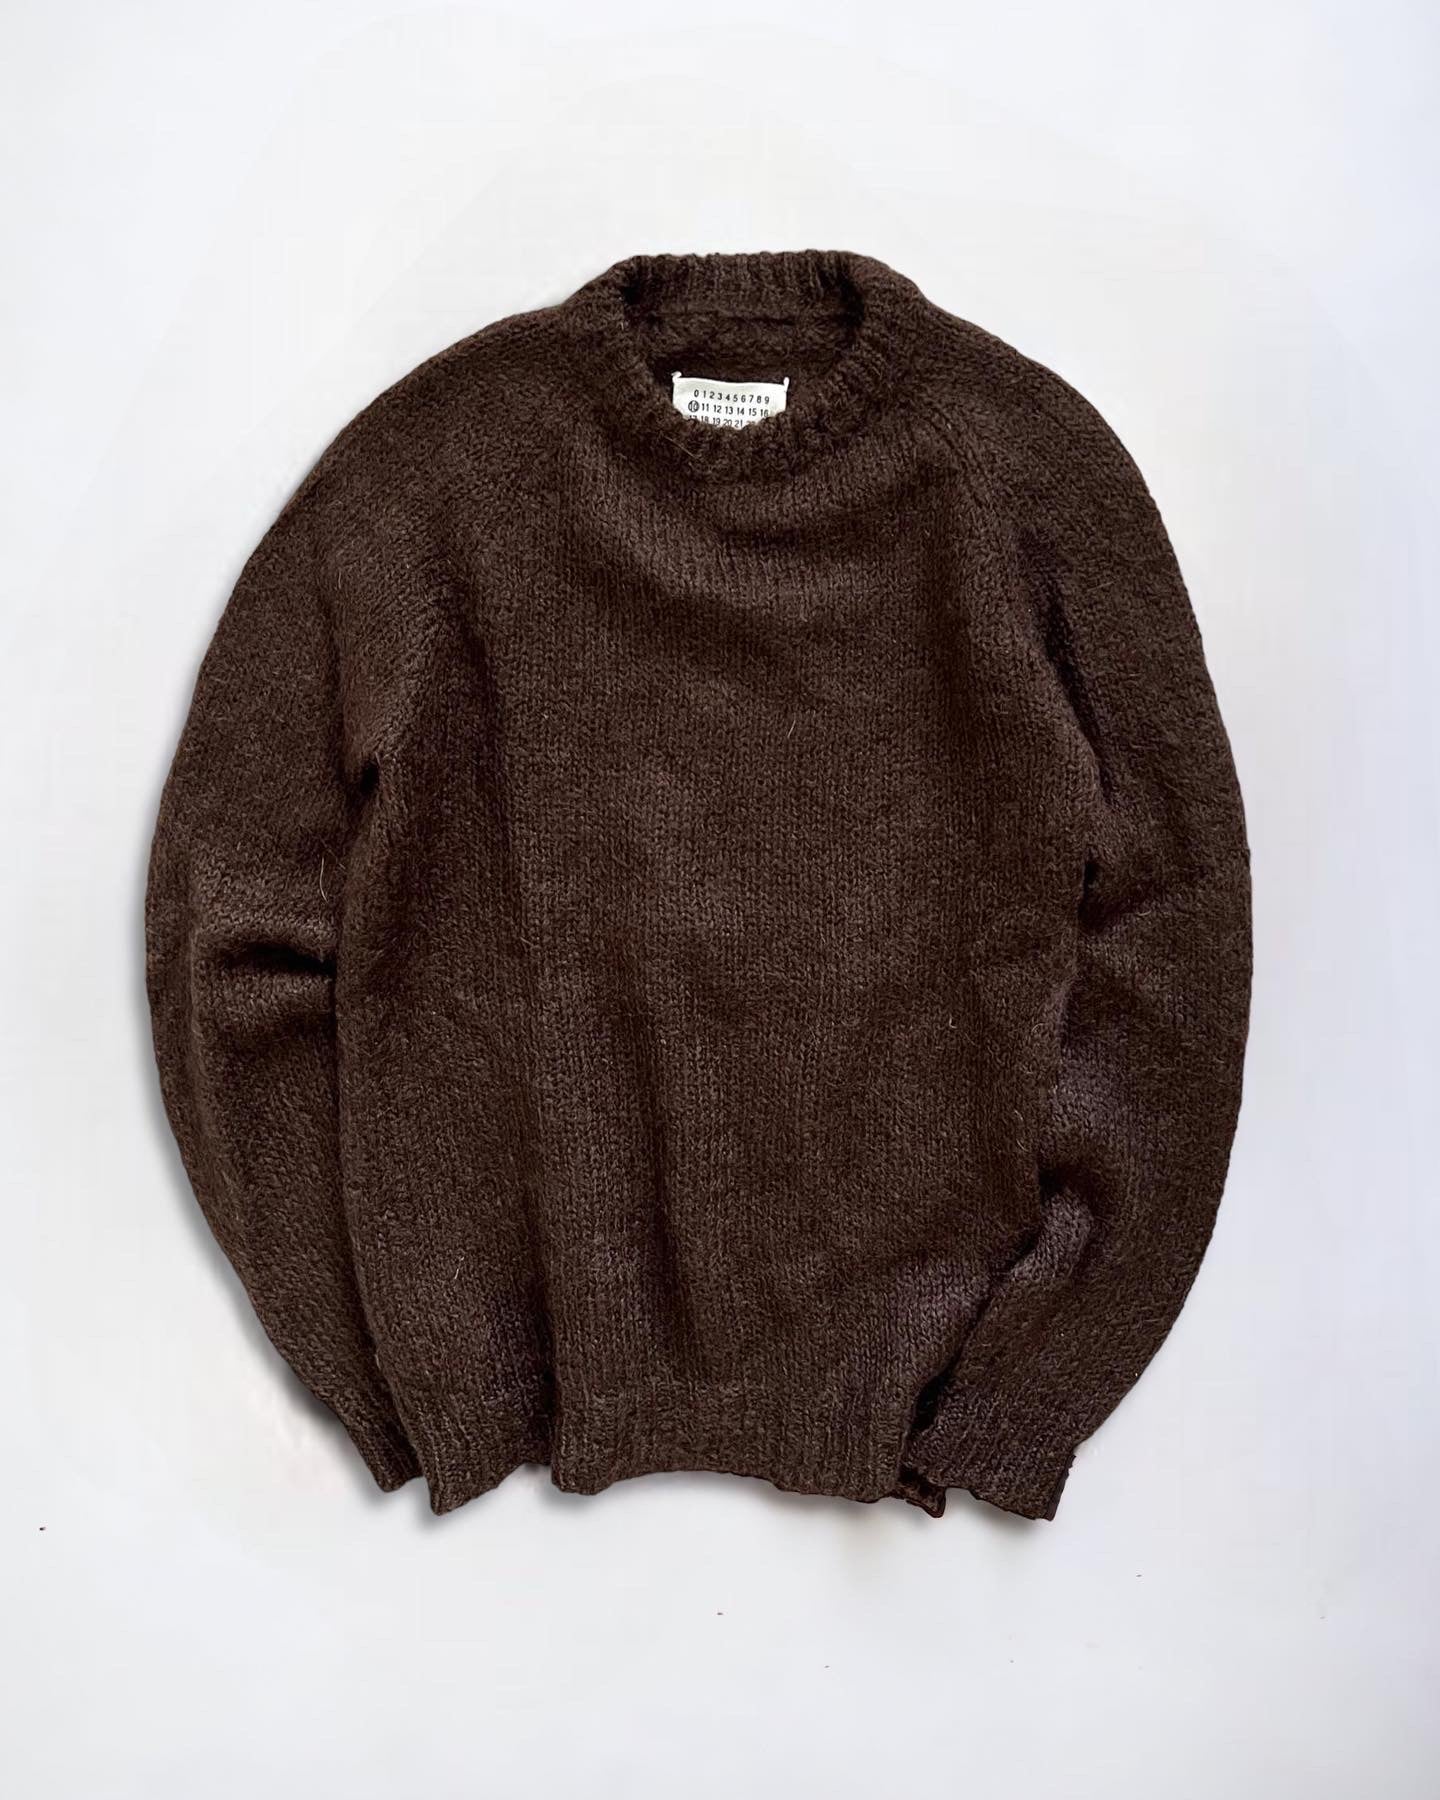 Martin Margiela AW2001 Mohair Knit Sweater by Miss Deanna - Size S